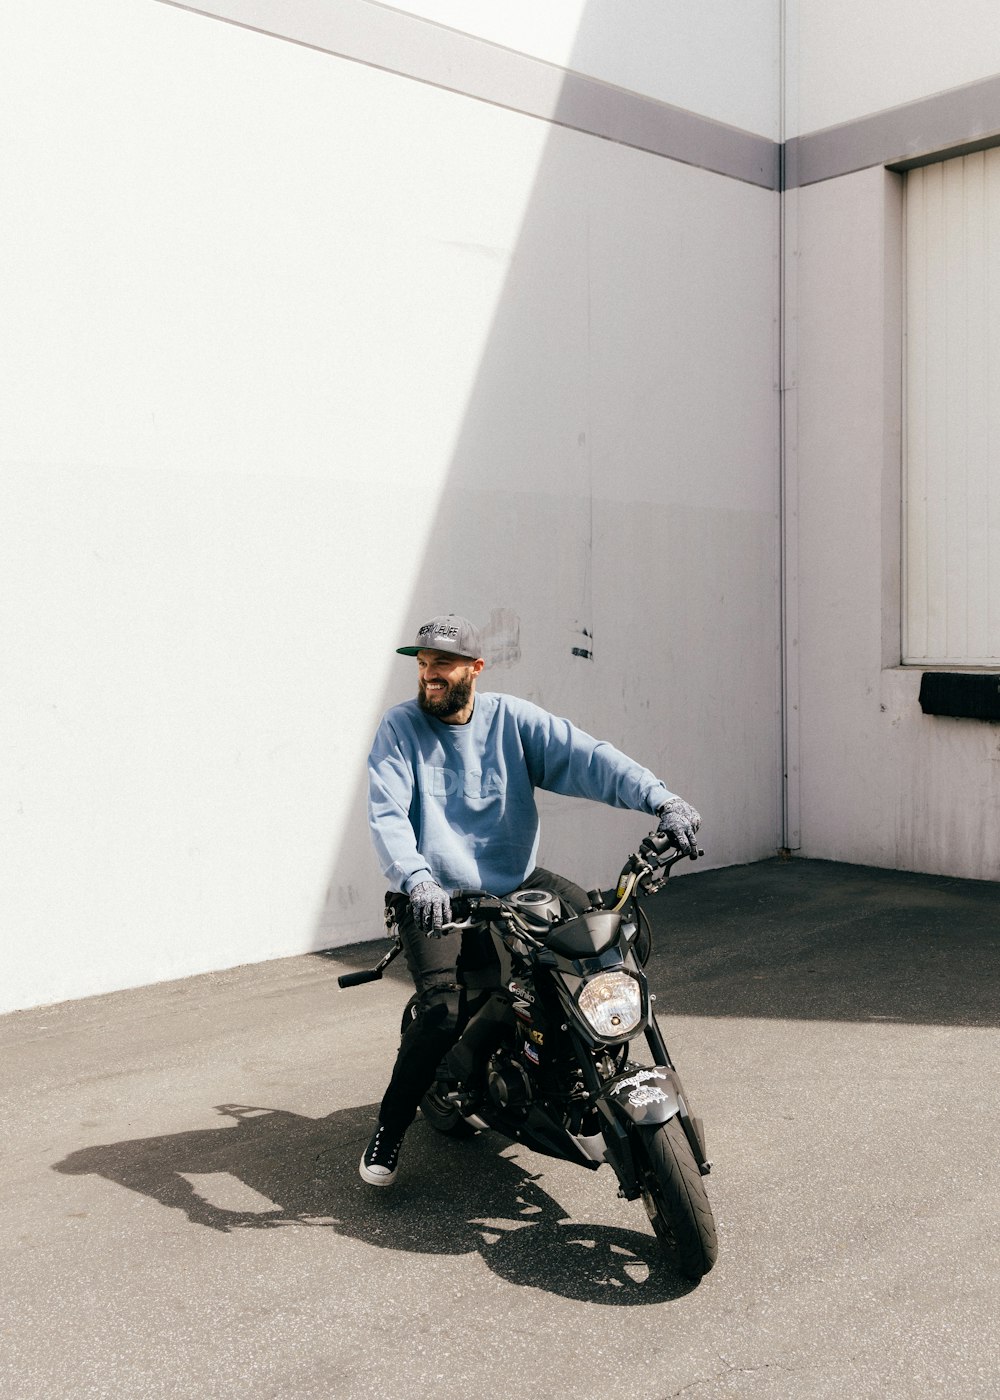 man in blue jacket riding on black motorcycle